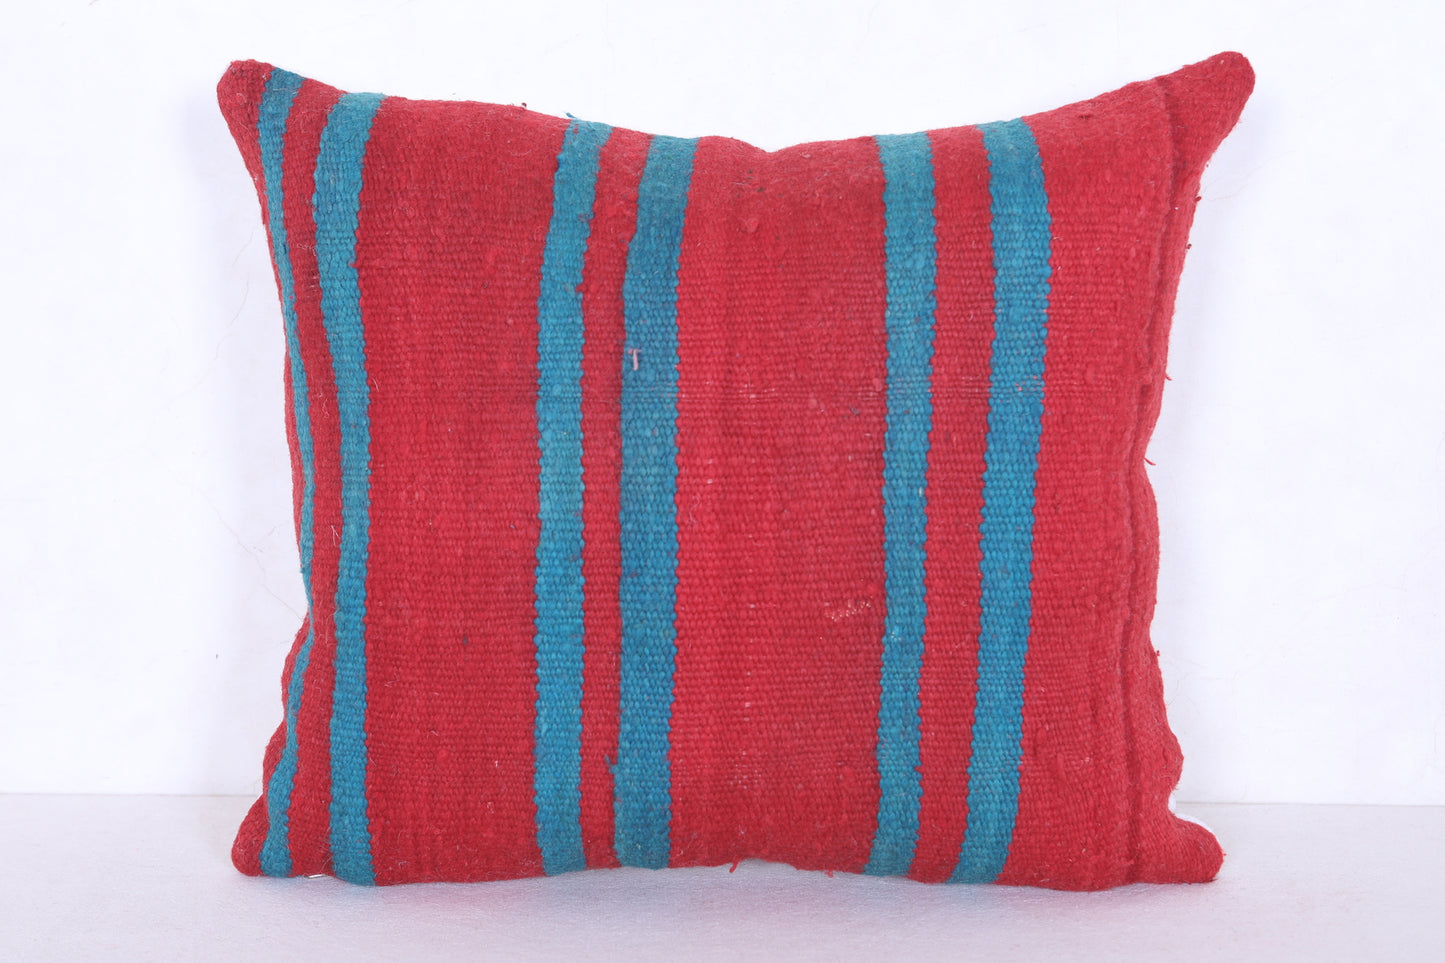 Vintage moroccan berber kilim pillows 16.5 INCHES X 20 INCHES